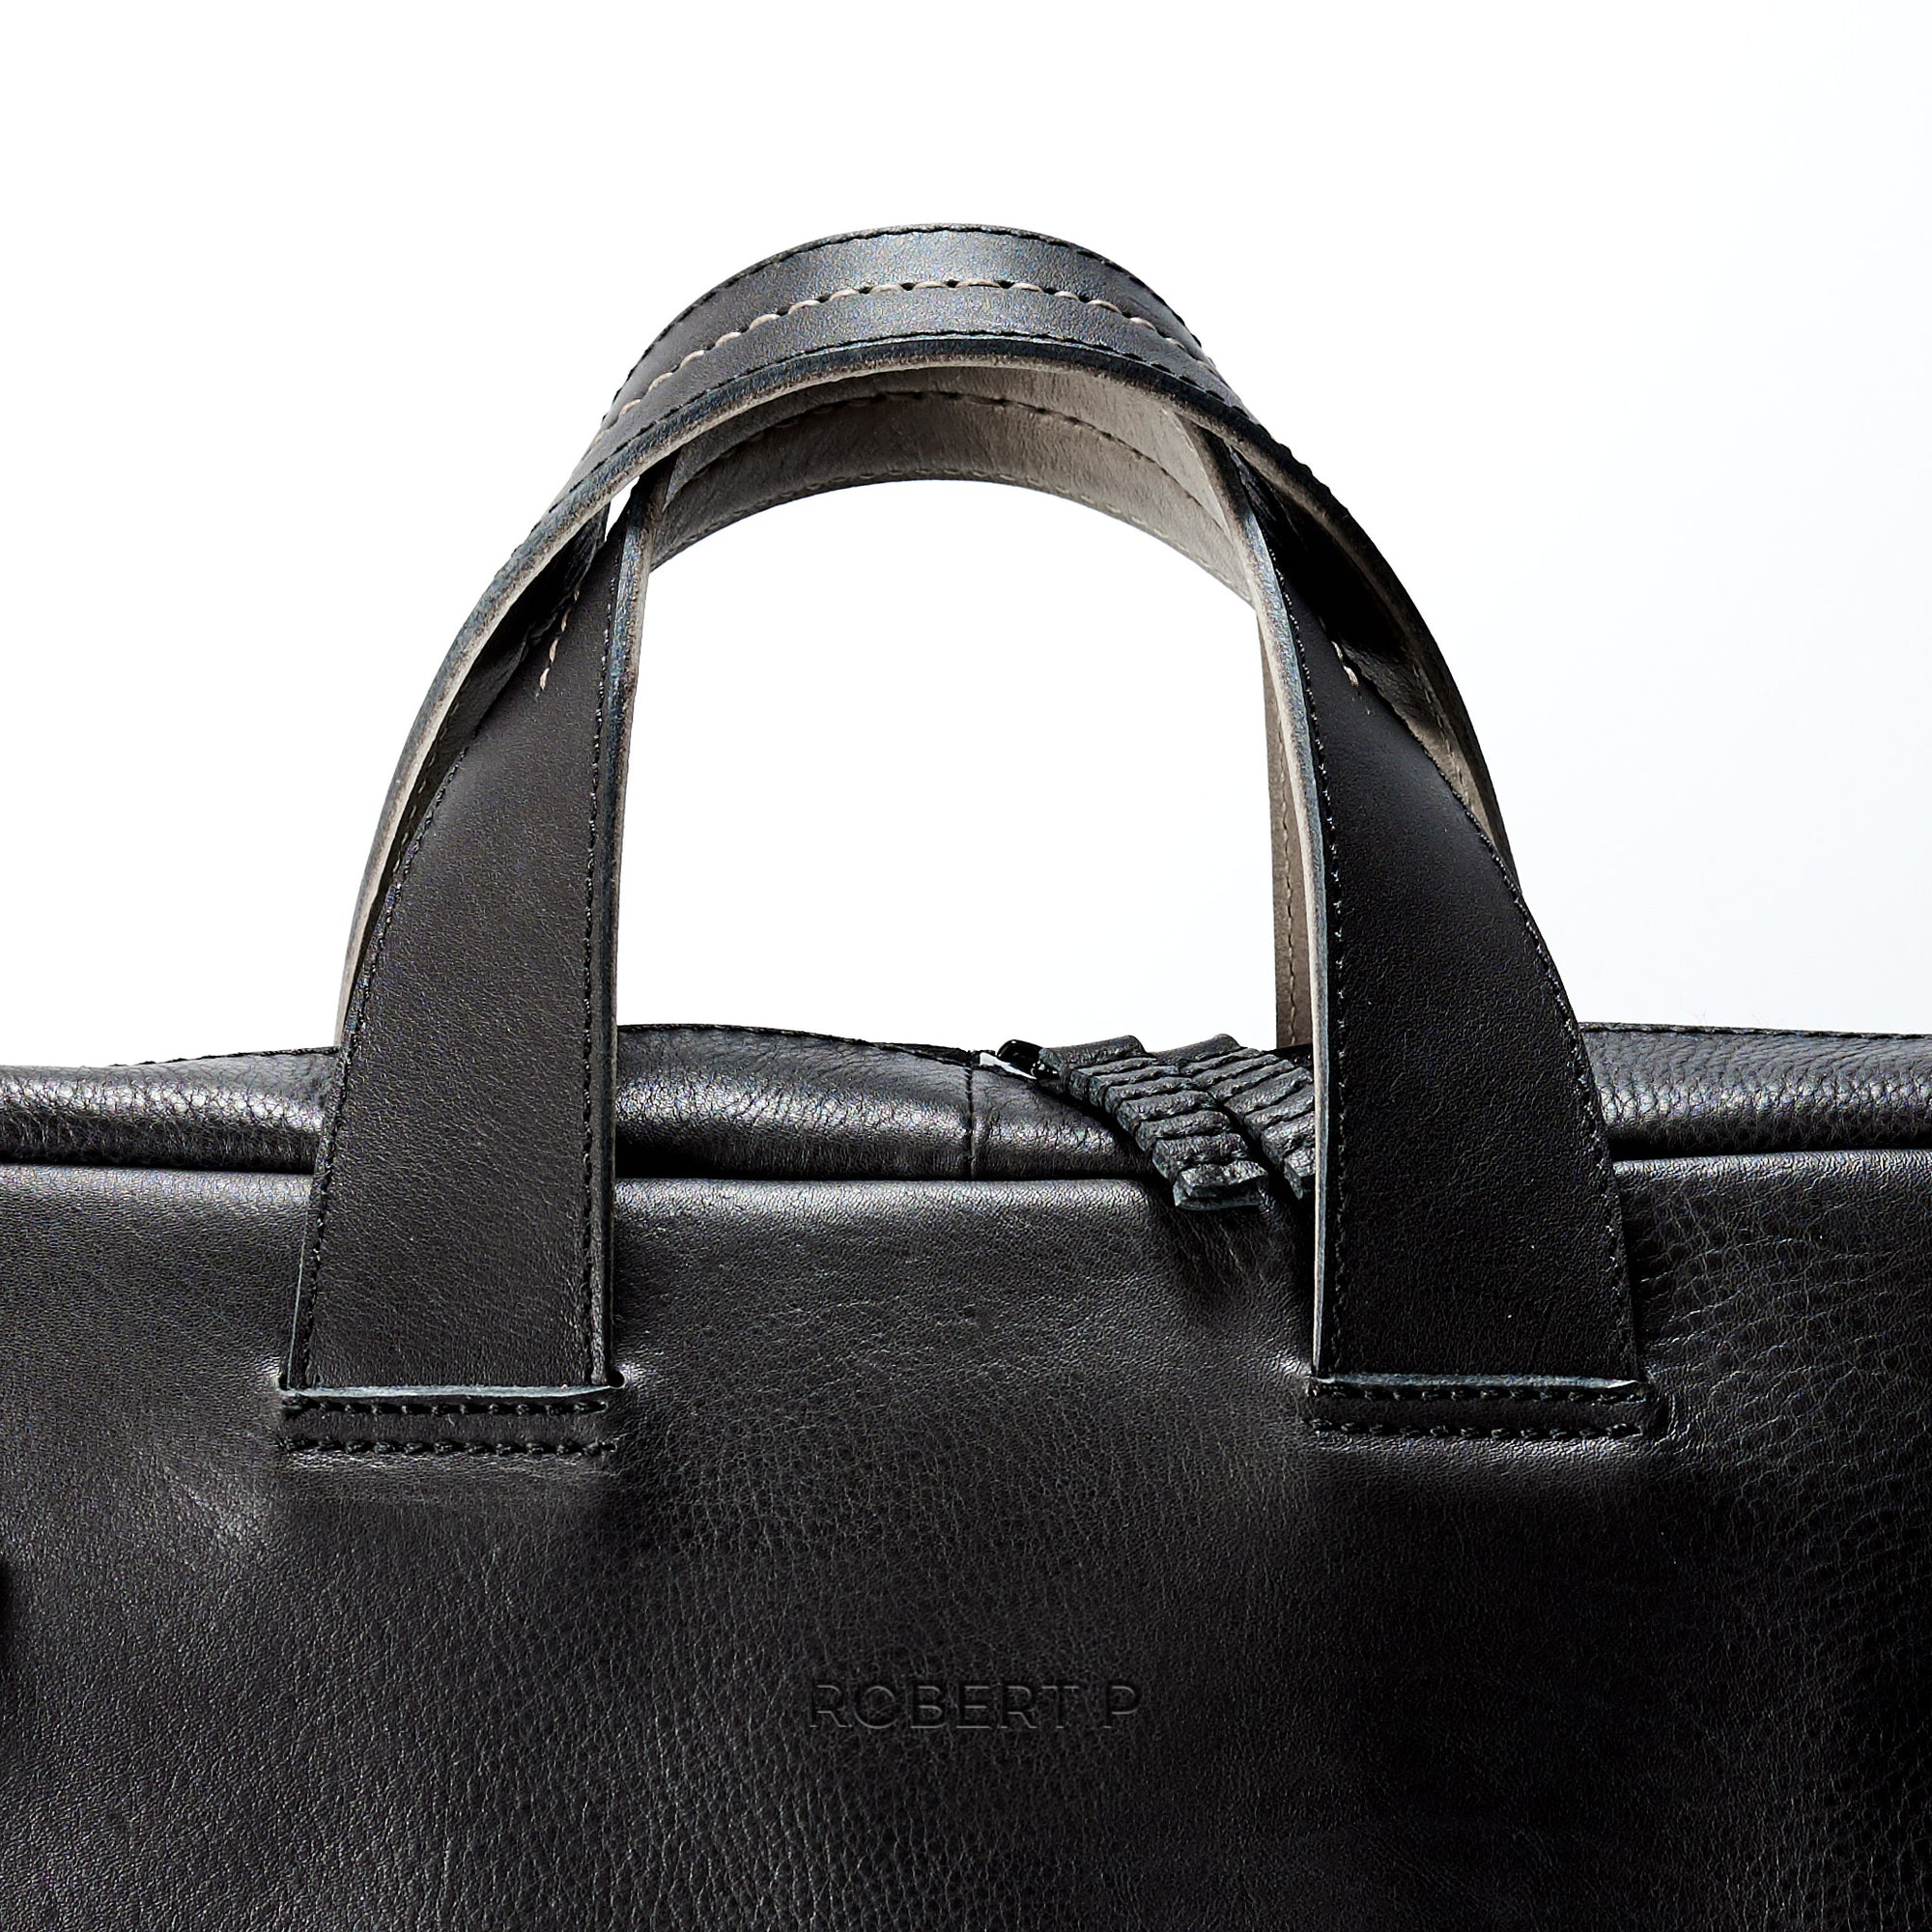 Personalized engraving. Custom black leather briefcase. Office style workbag